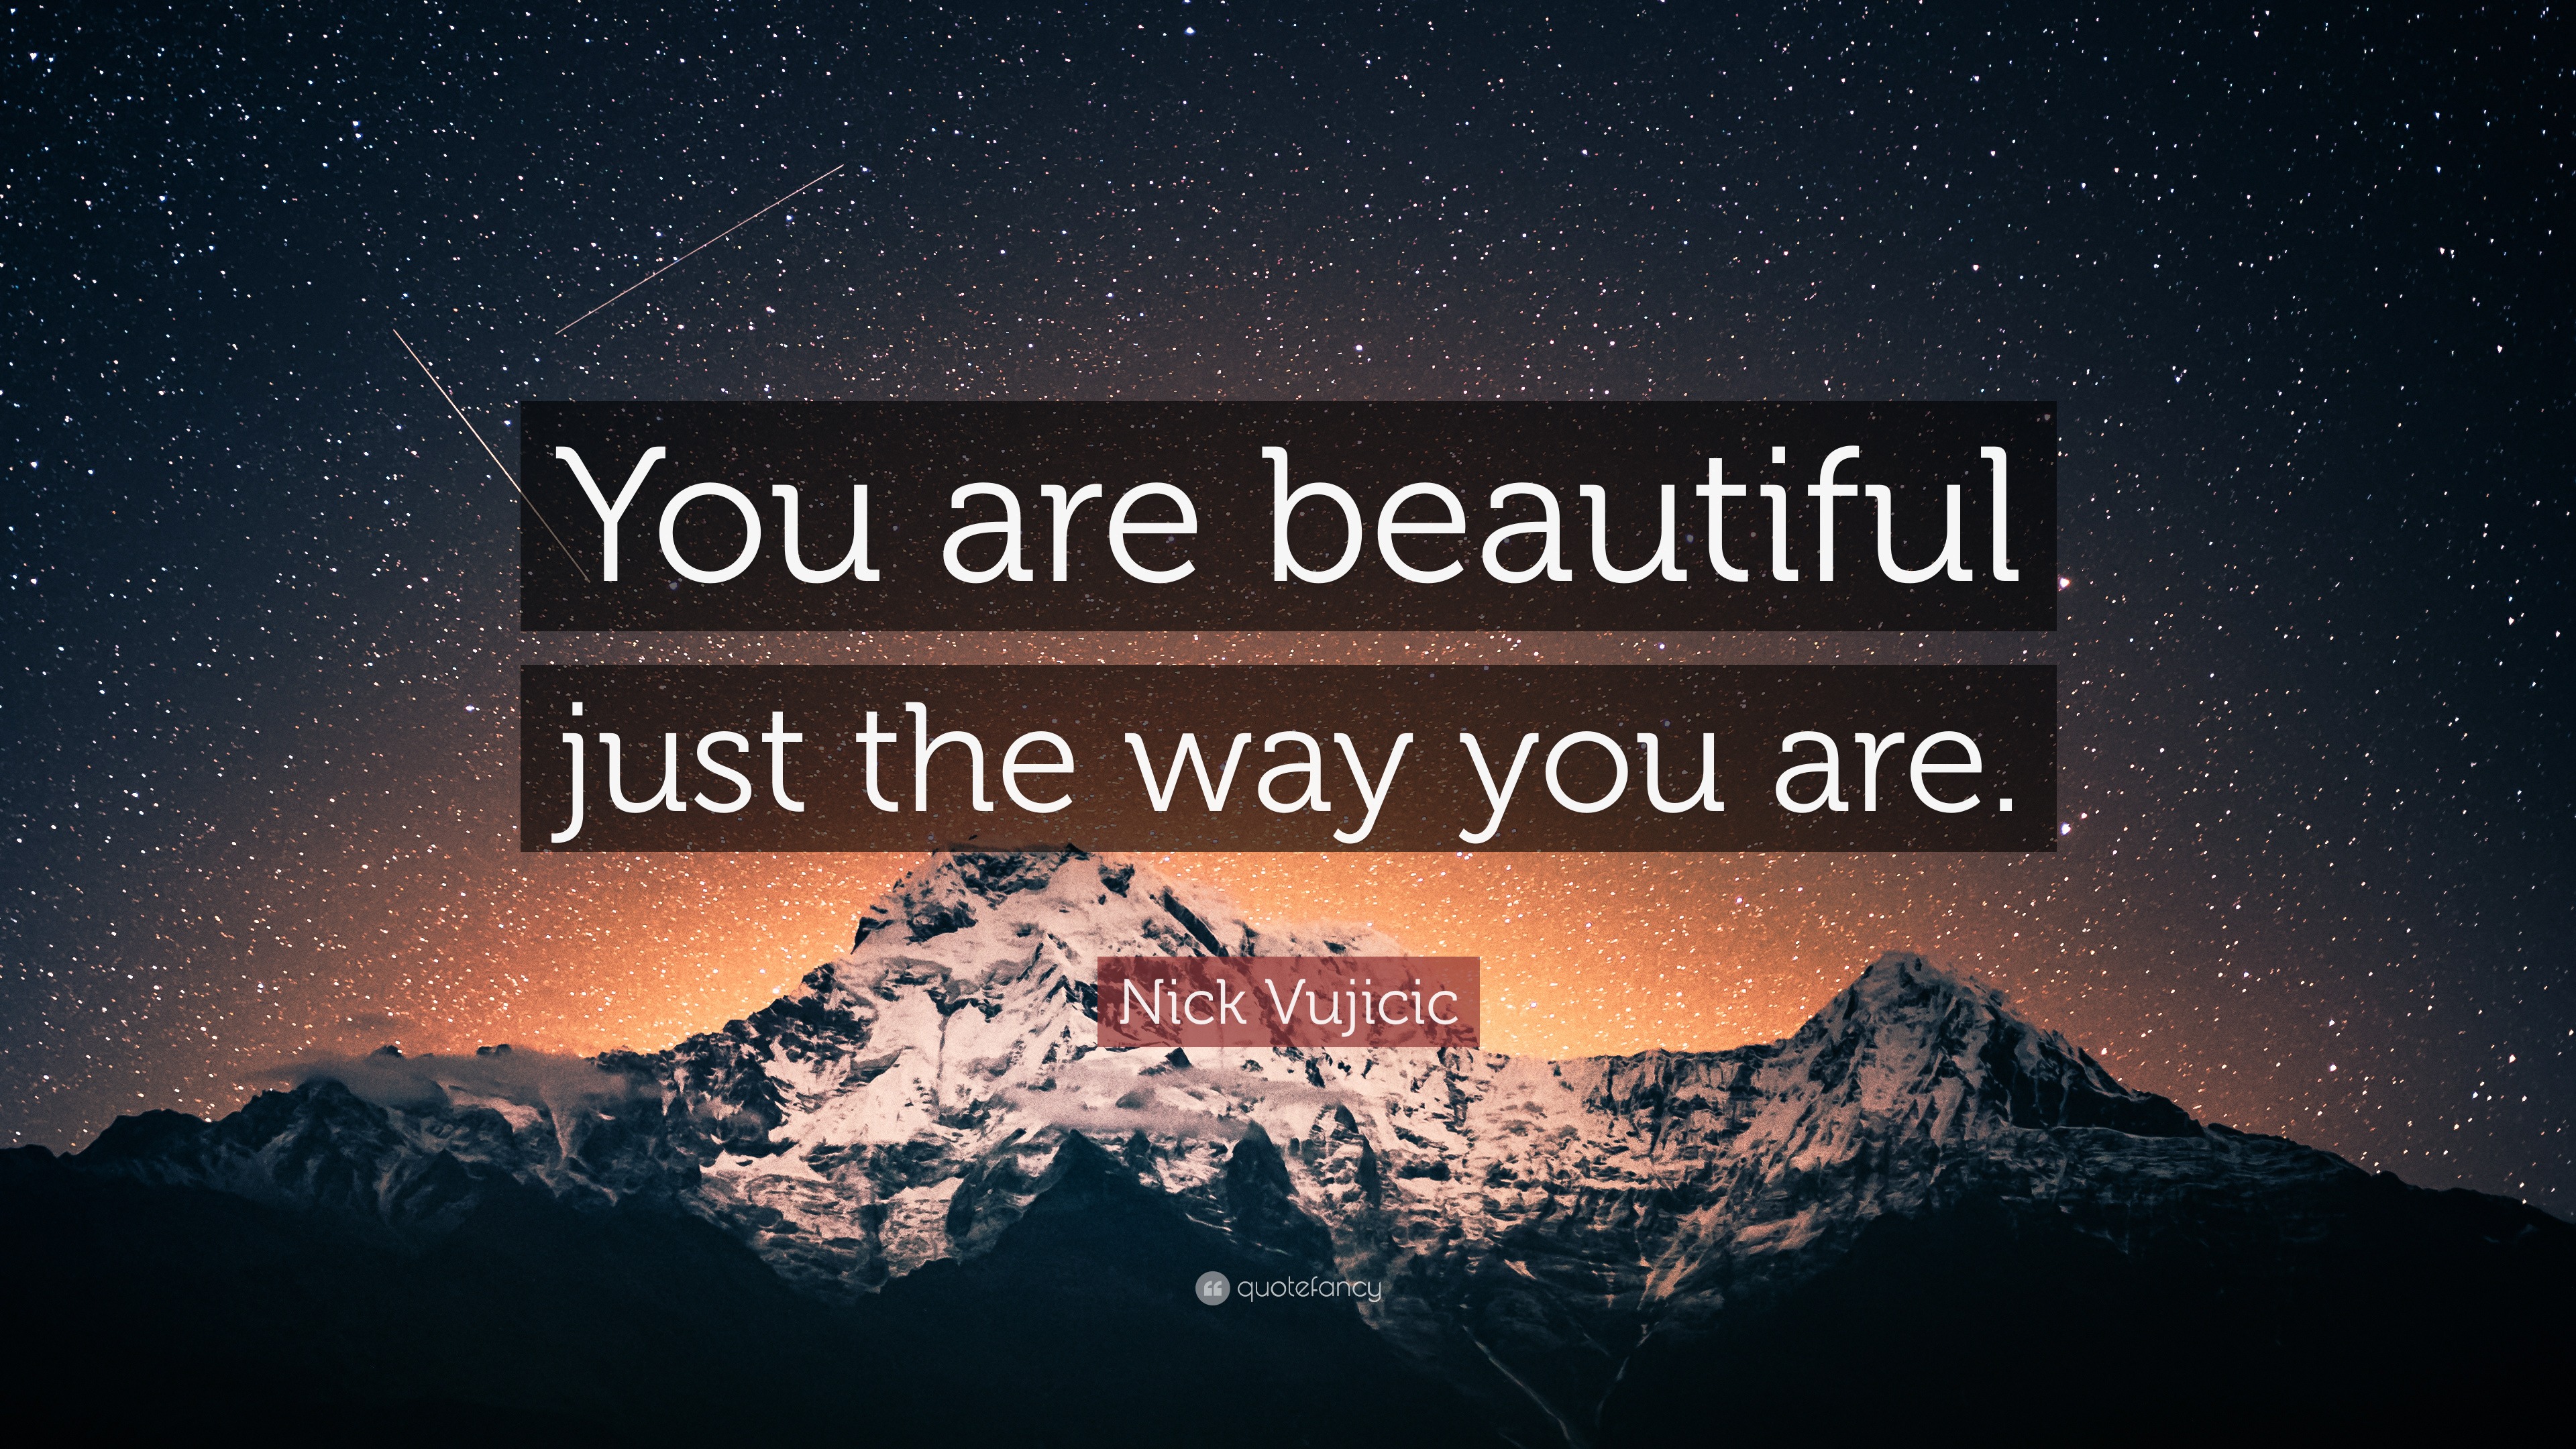 Nick Vujicic Quote “You are beautiful just the way you